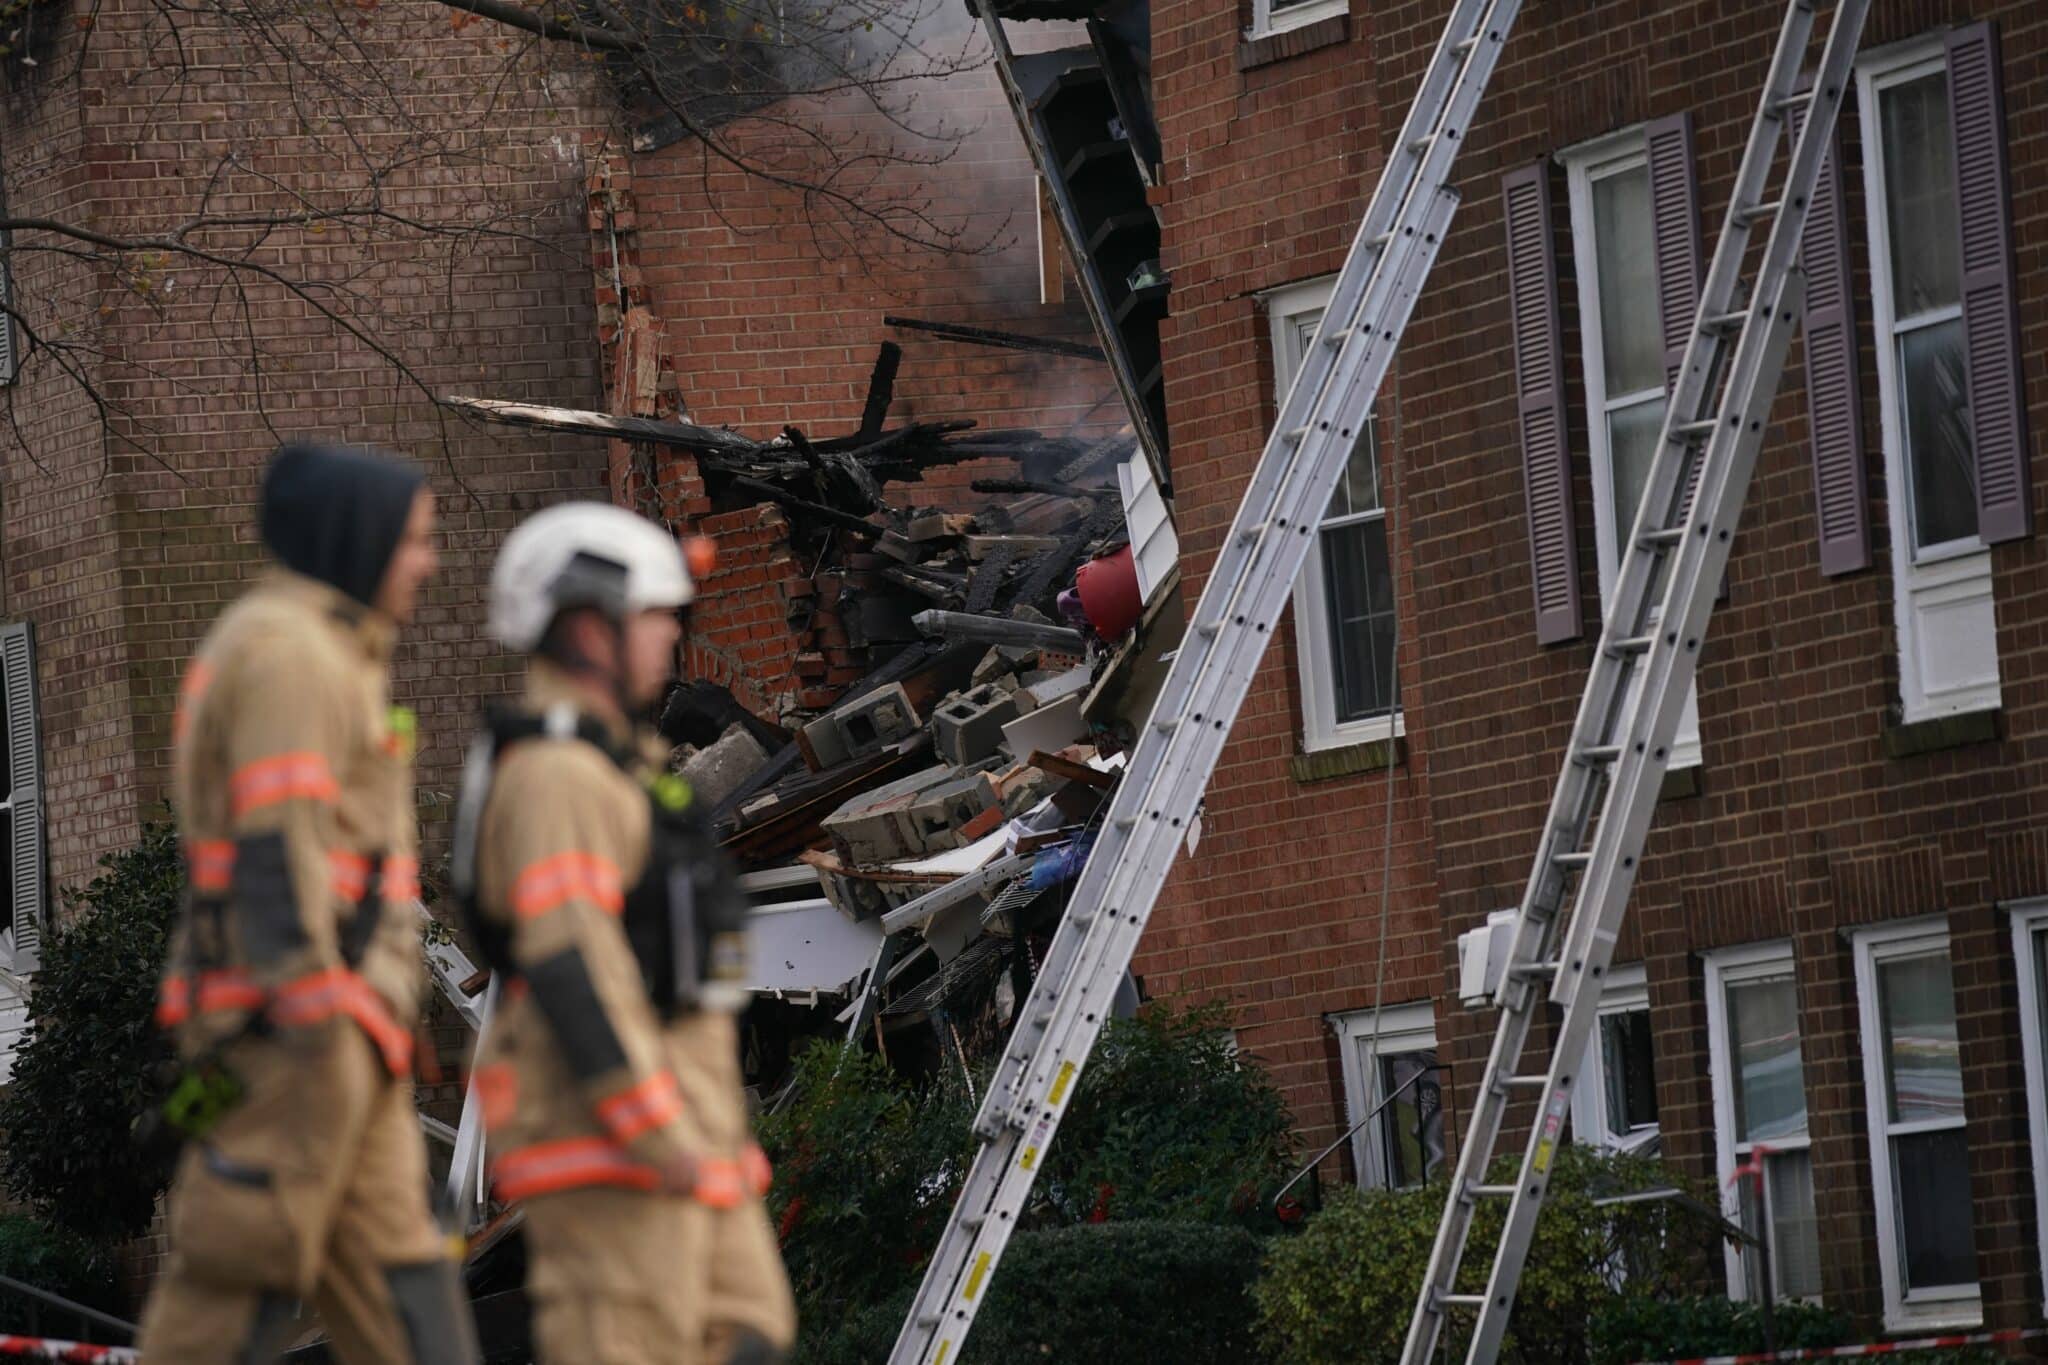 Firefighters inspect the site of a fire caused by an explosion at a Gaithersburg, Maryland, apartment building in which 12 people were reported injured on November 16, 2022, according to officials. - A preliminary report by fire department officials indicate the explosion was a gas leak. (Photo by Stefani Reynolds / AFP) (Photo by STEFANI REYNOLDS/AFP via Getty Images)